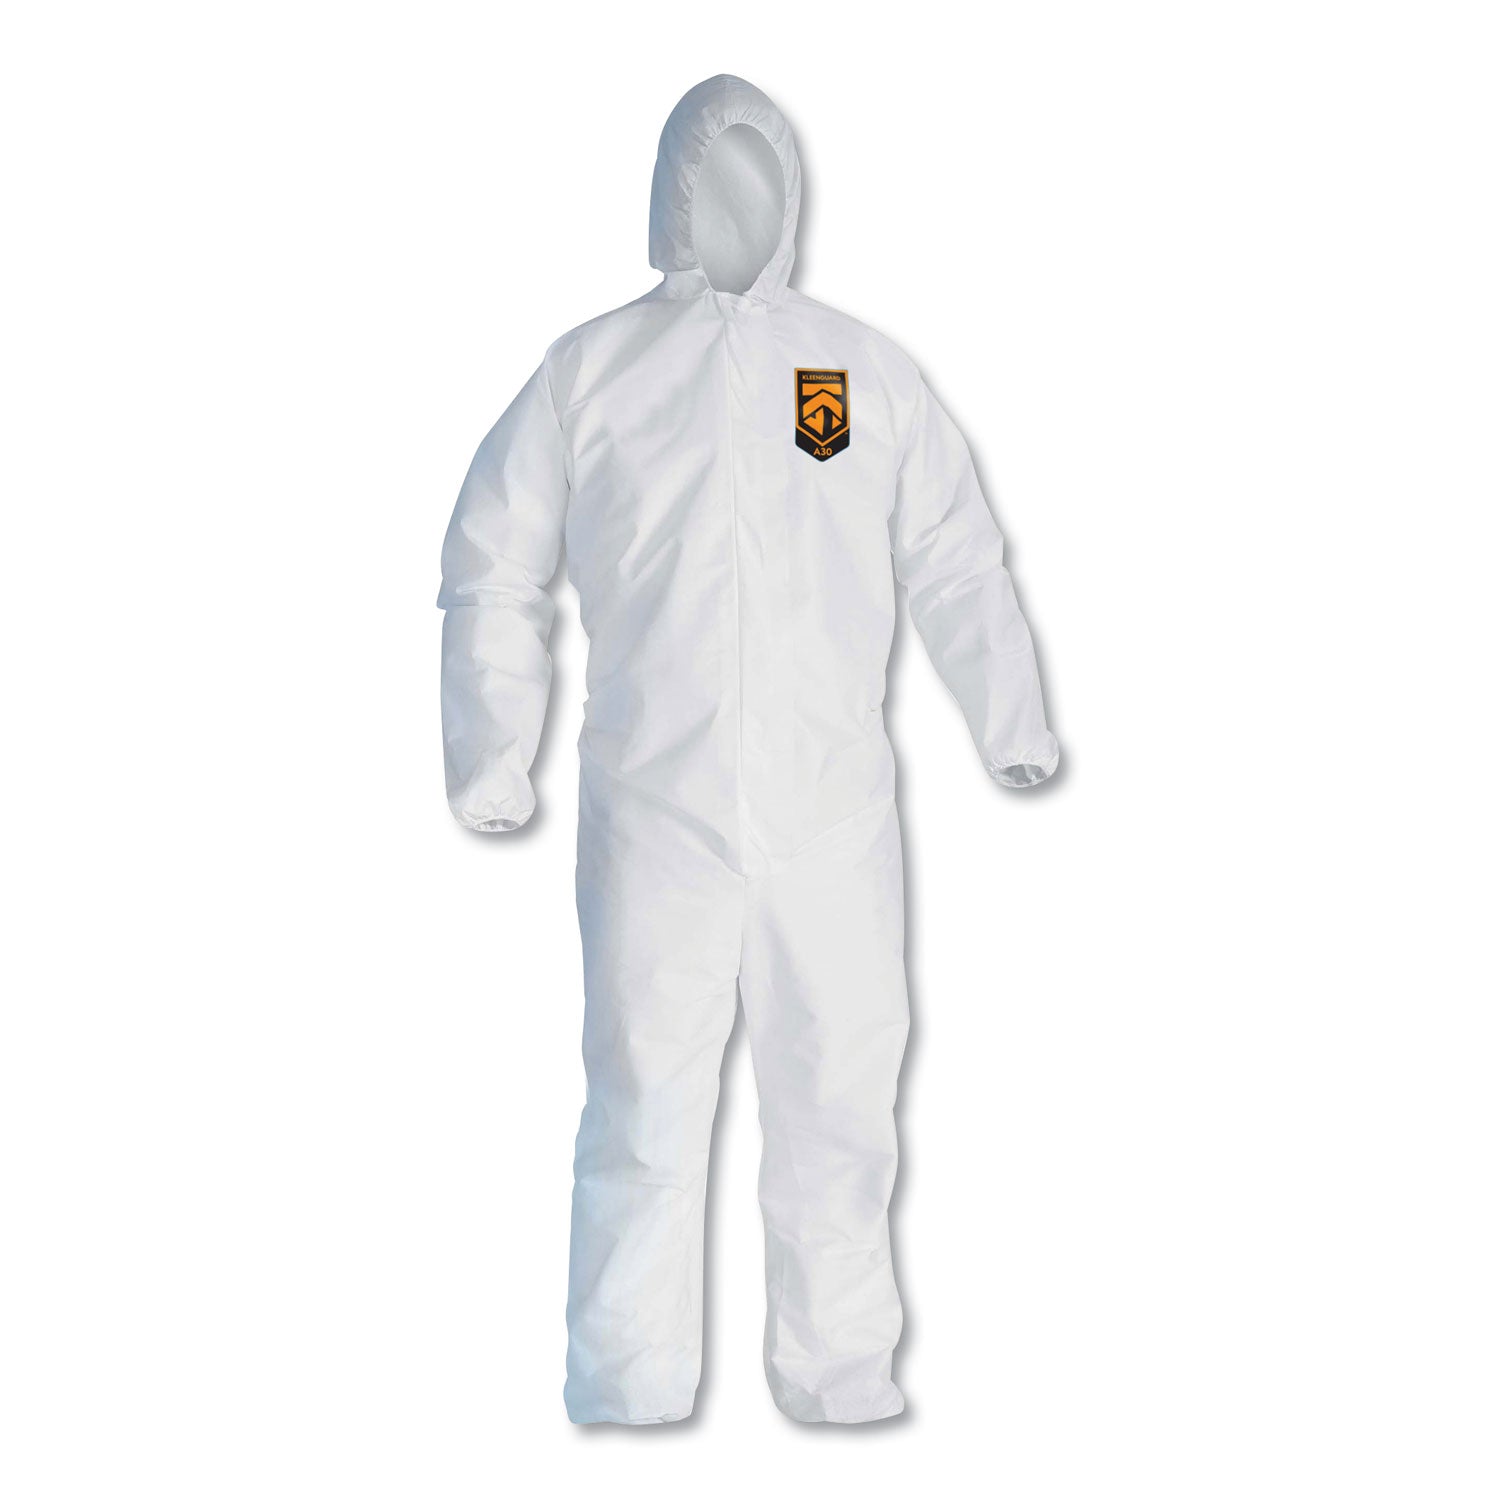 a30-elastic-back-and-cuff-hooded-coveralls-x-large-white-25-carton_kcc46114 - 1